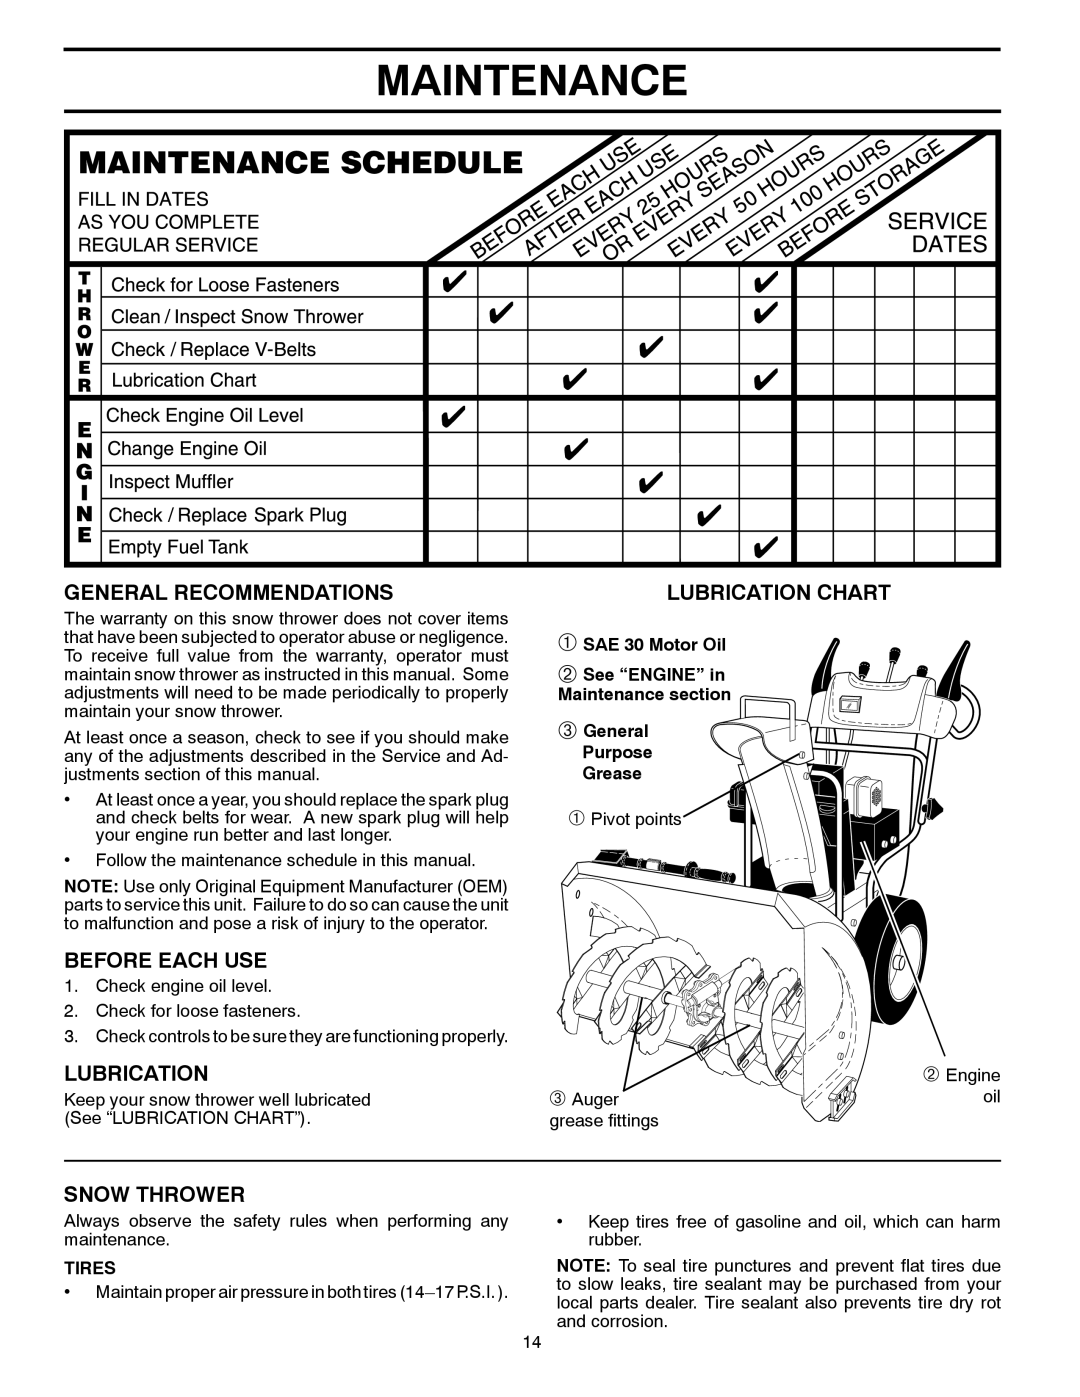 Husqvarna 96193005200 Maintenance, General Recommendations, Before Each Use, Snow Thrower, Lubrication Chart, Tires 